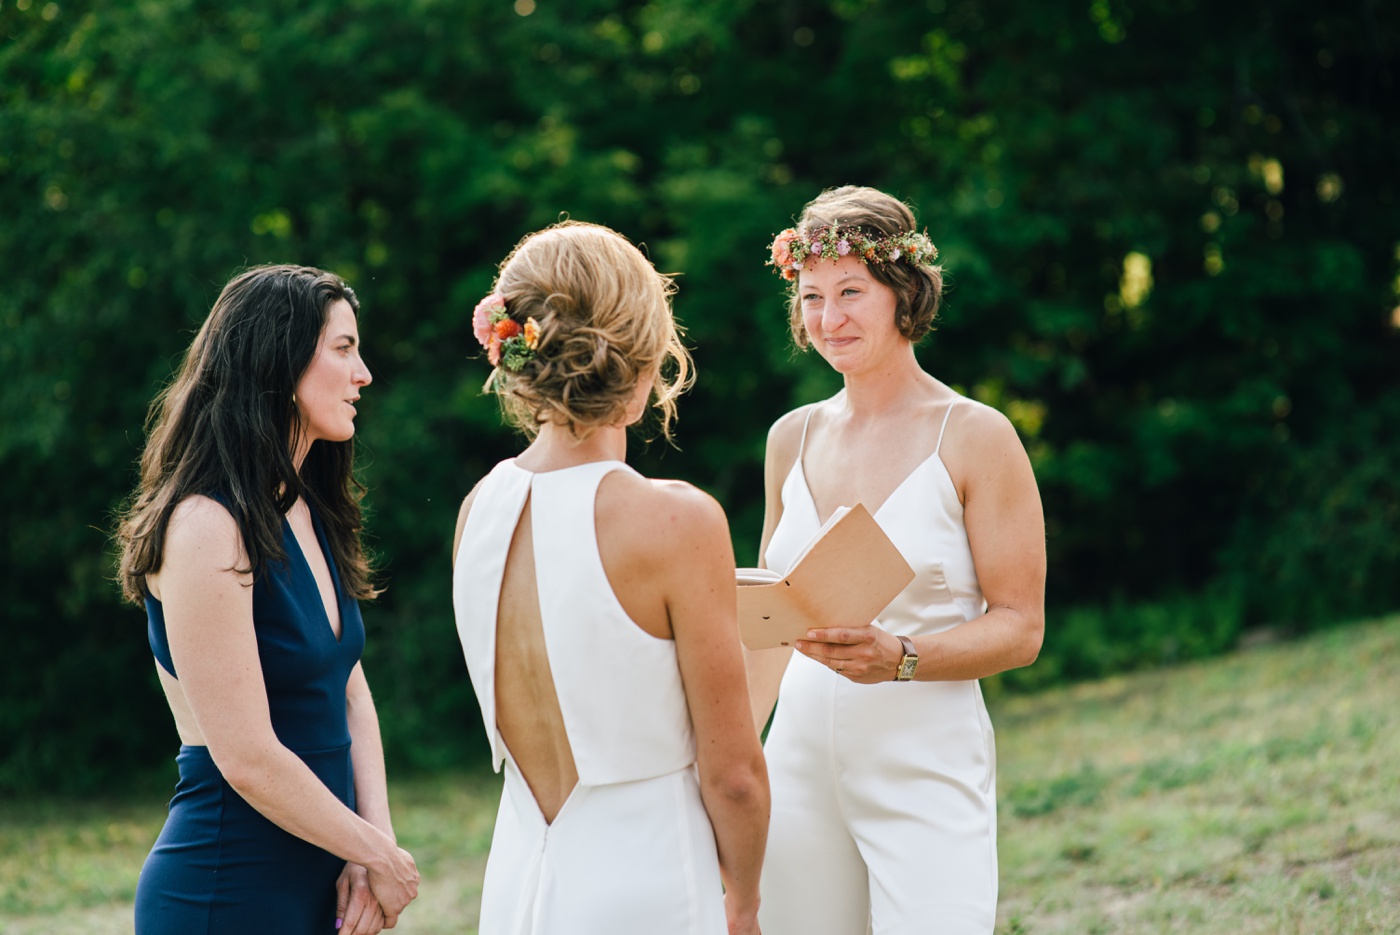 Intimate wedding ceremony on a private estate in the White Mountains